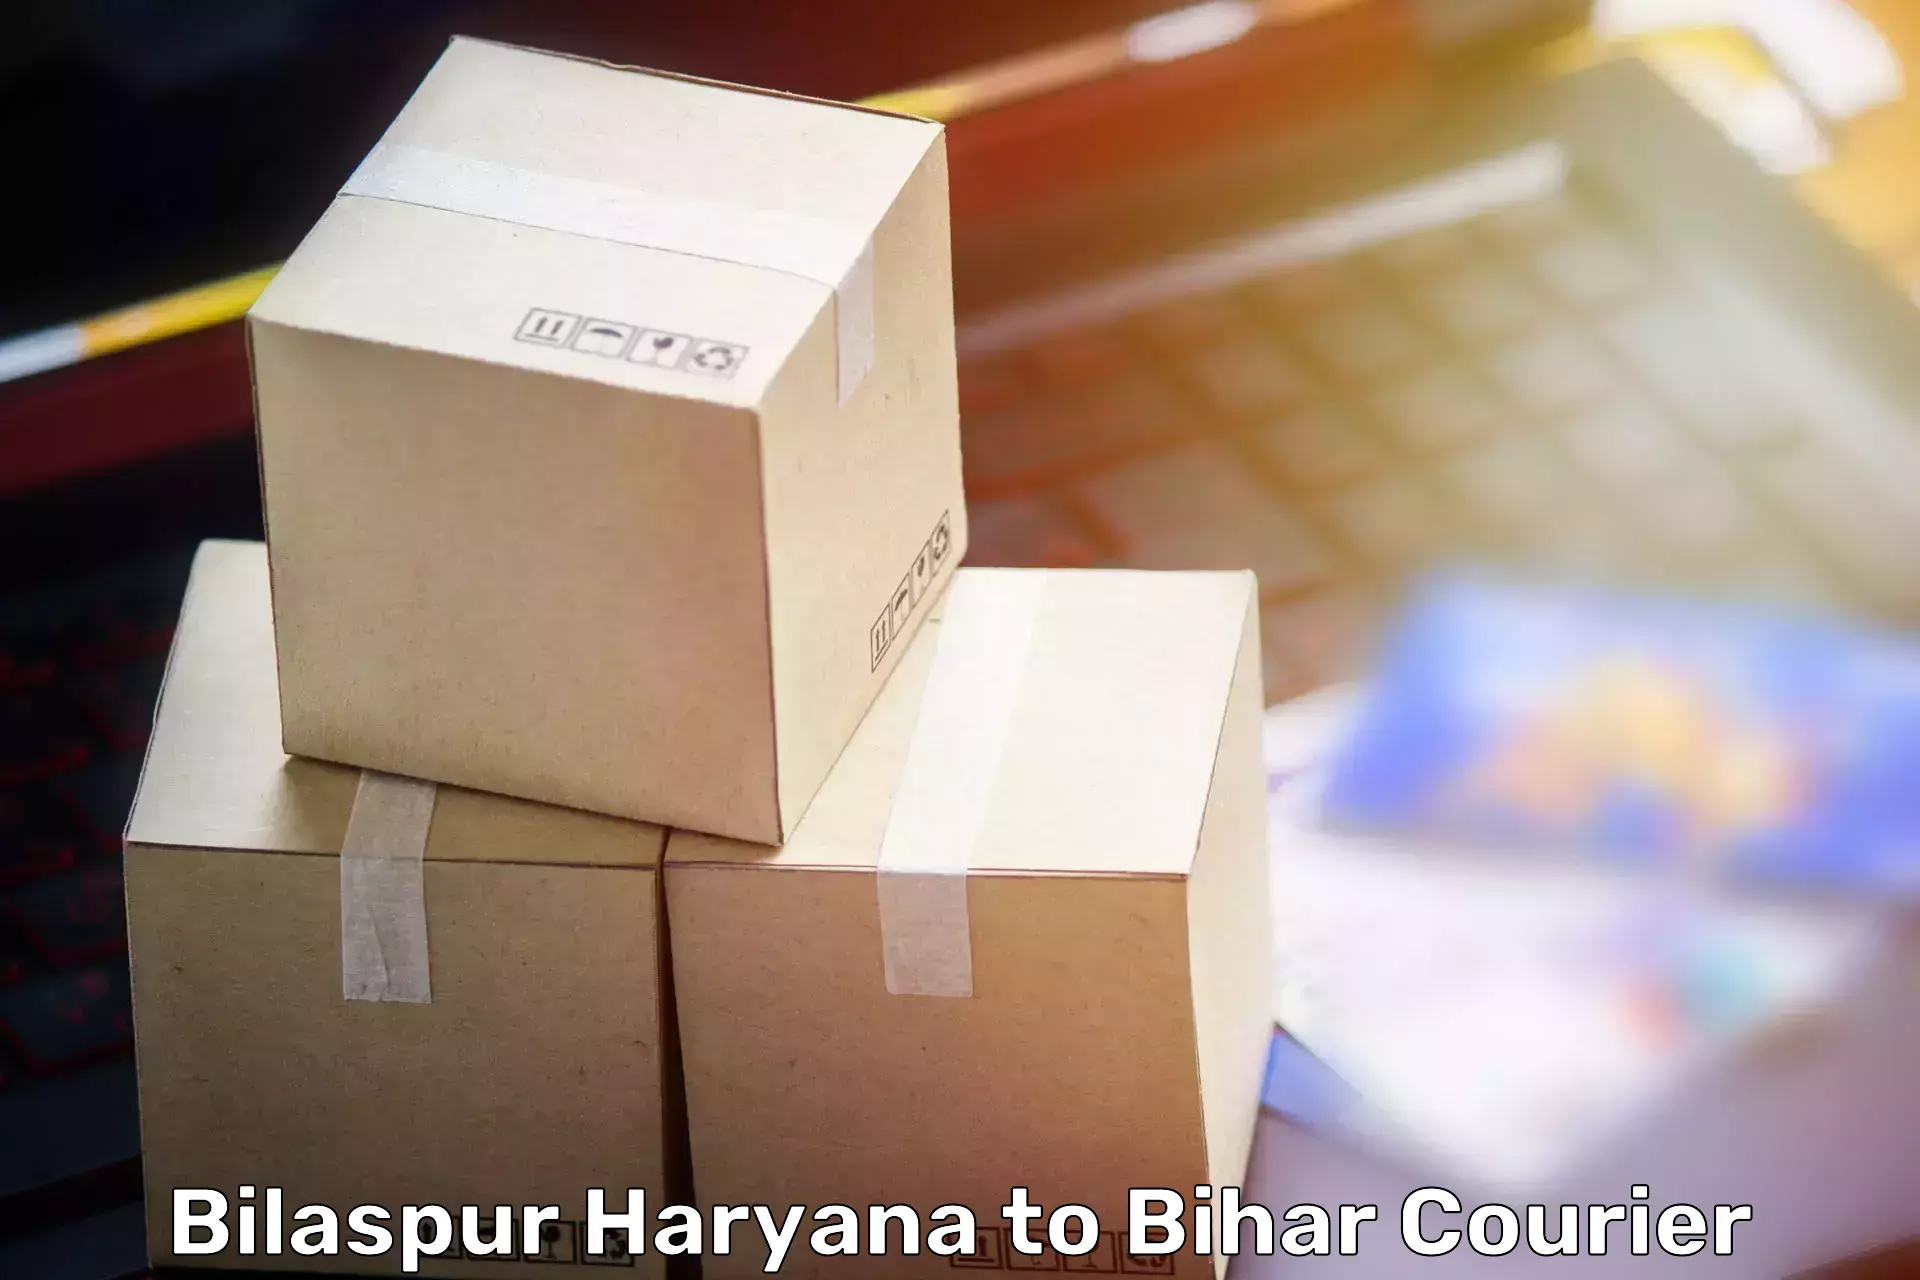 Moving and handling services Bilaspur Haryana to Bihar